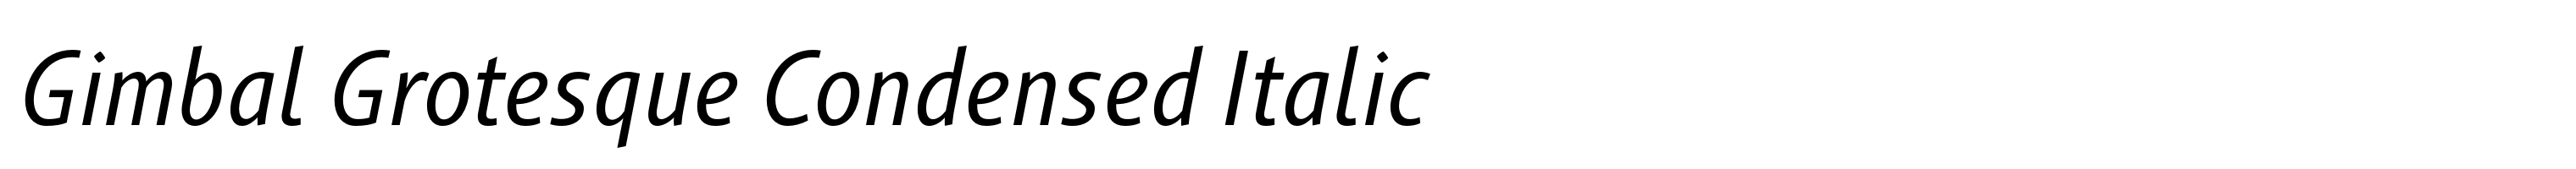 Gimbal Grotesque Condensed Italic